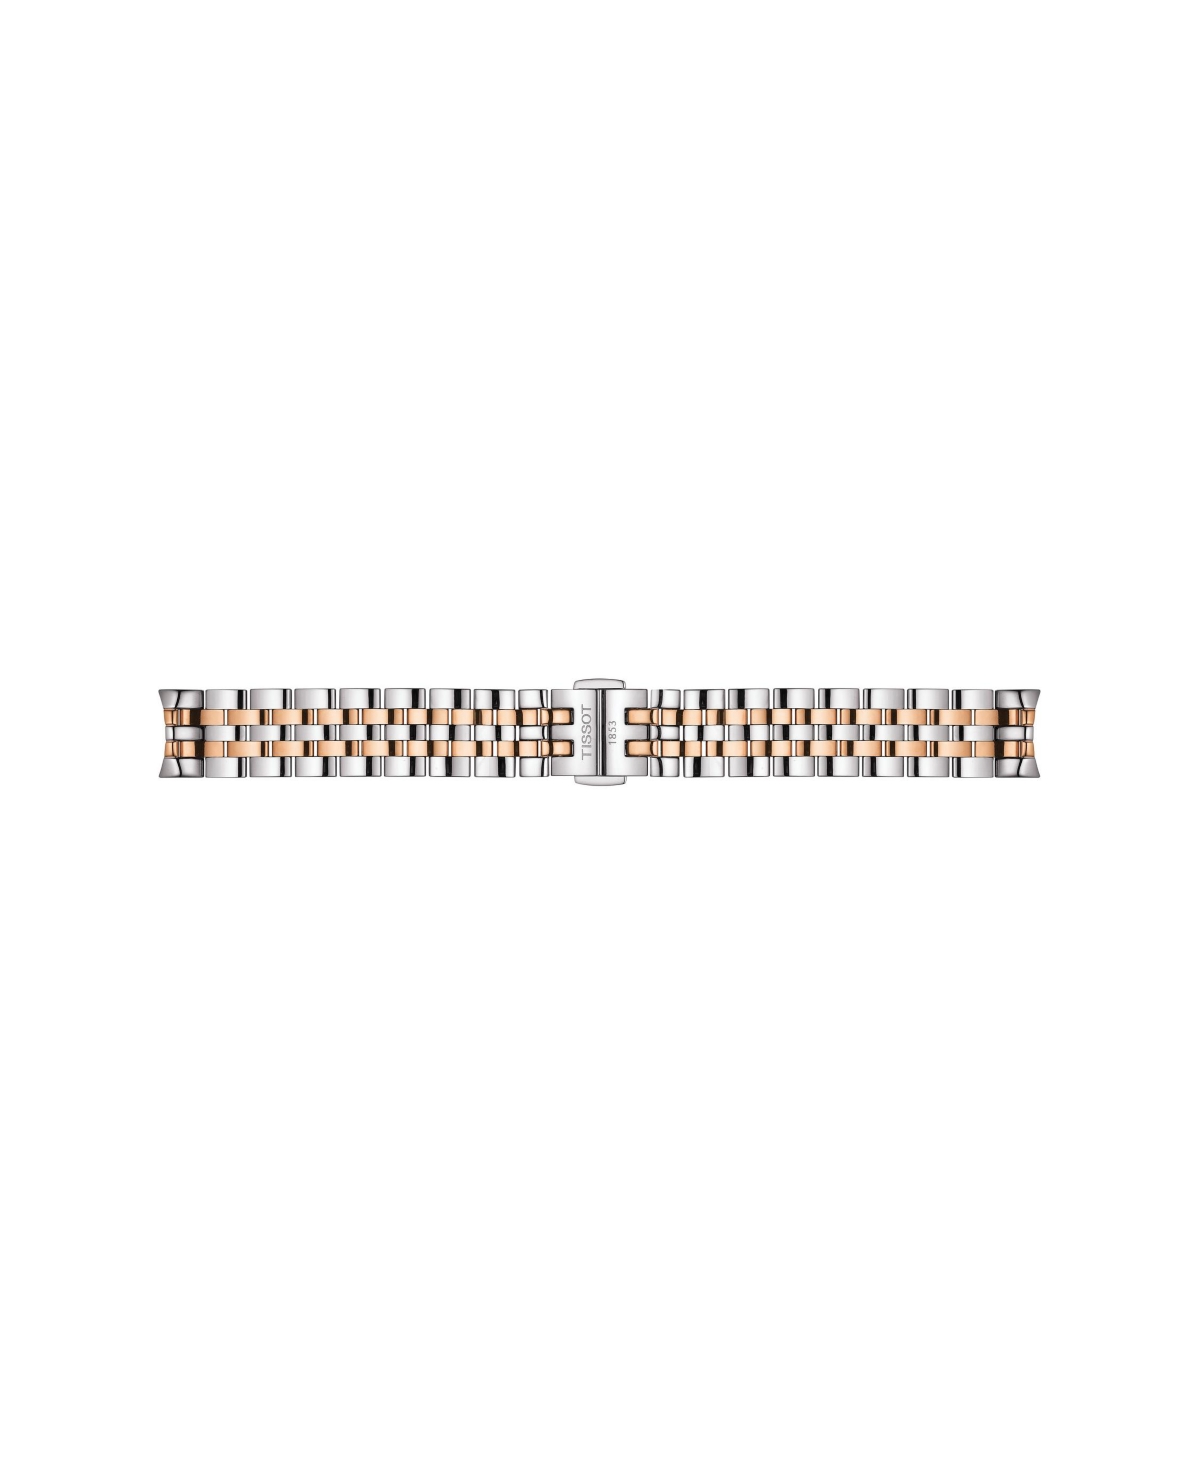 Shop Tissot Women's Swiss Automatic Le Locle Diamond-accent Two-tone Stainless Steel Bracelet Watch 29mm